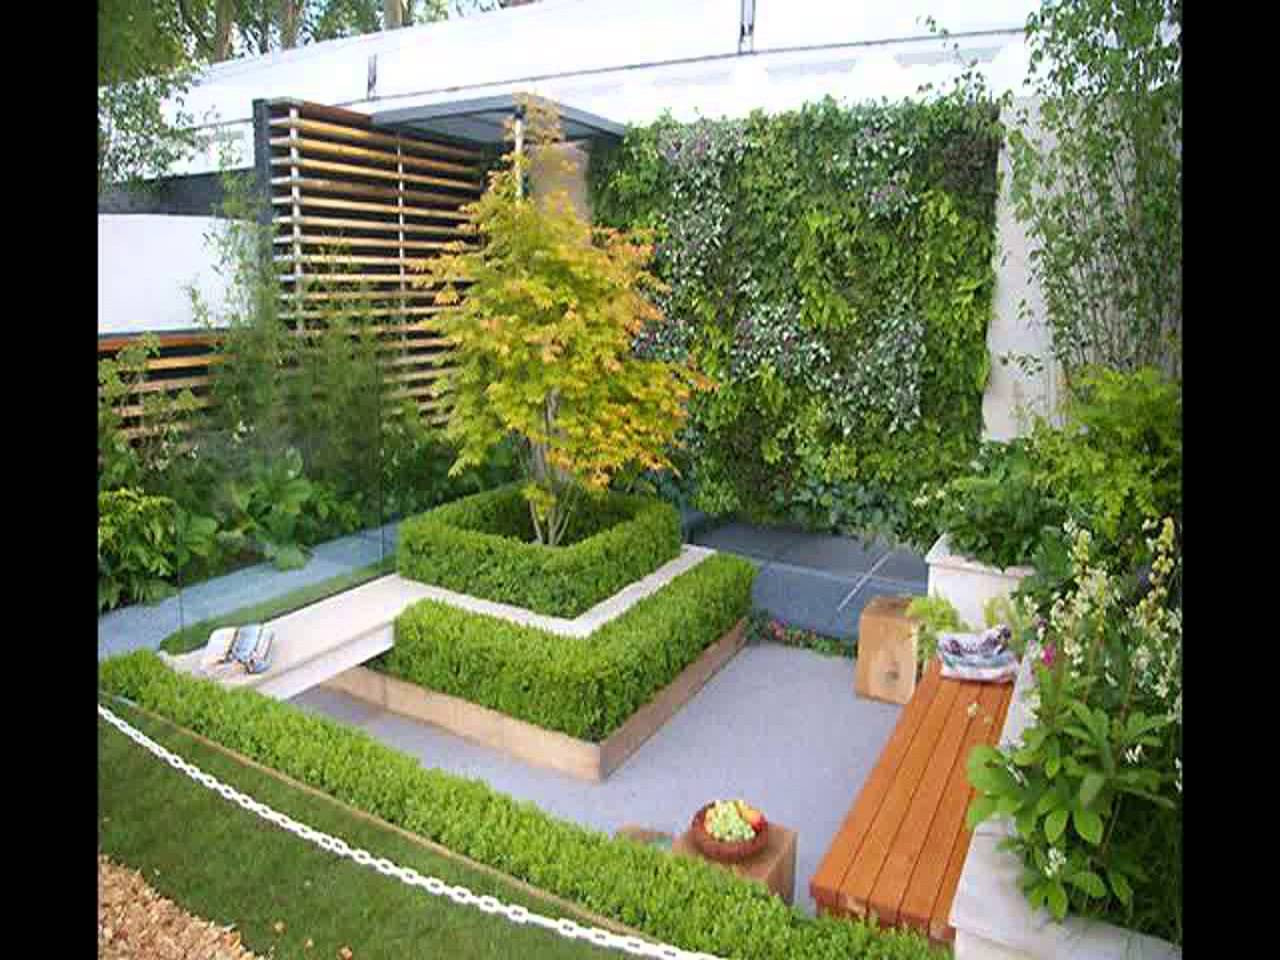 Landscape Designs For Small Yards
 Landscaping Ideas Small Yard Patio Backyard This Tips